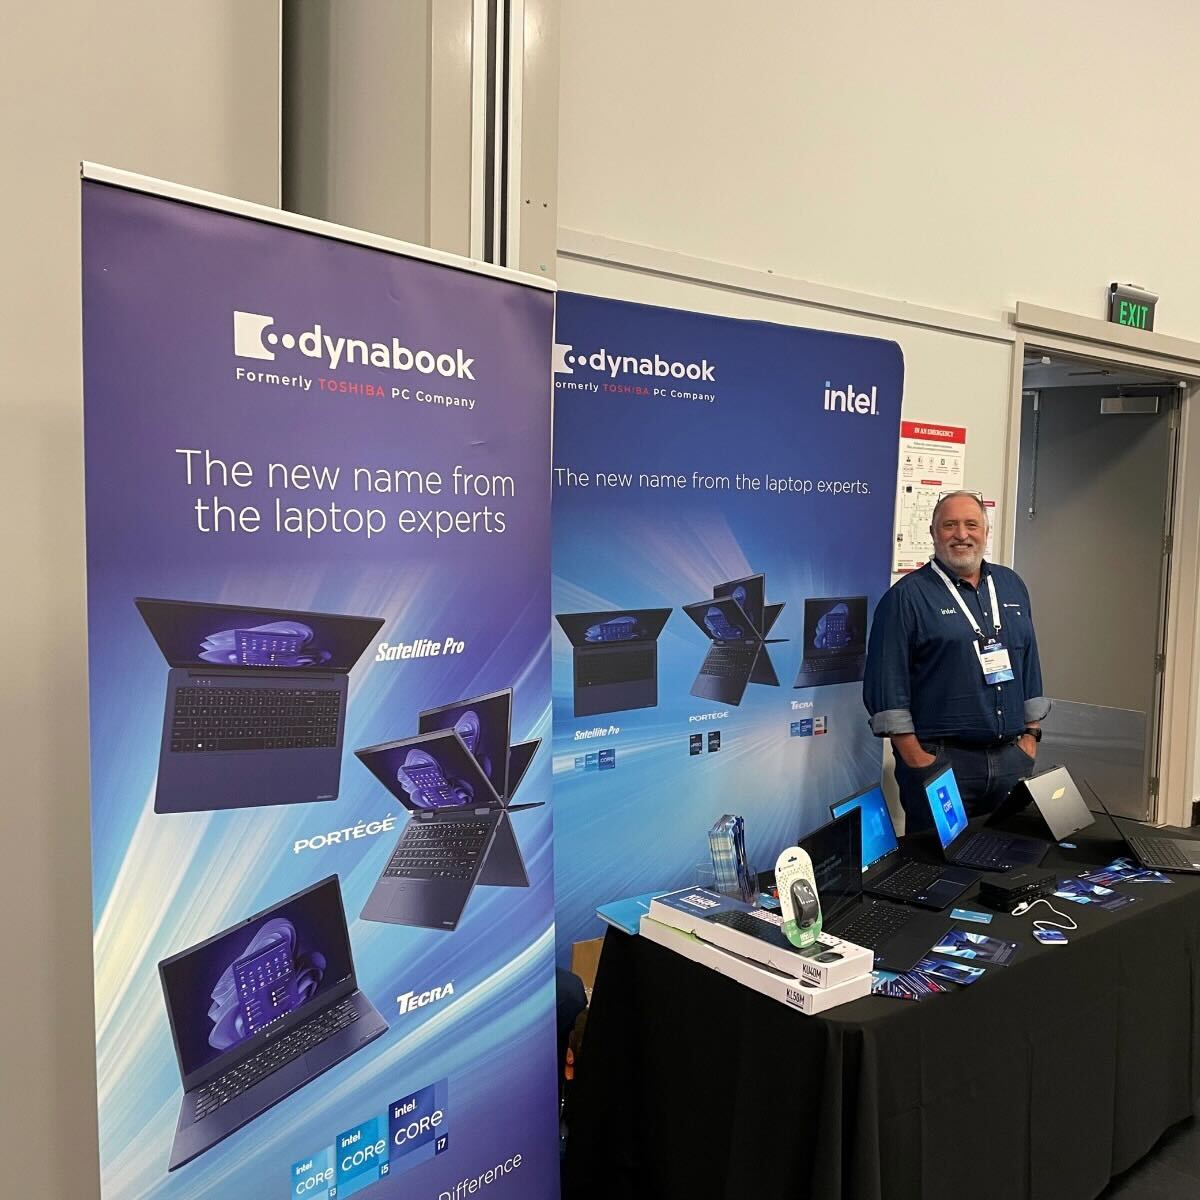 A great event yesterday for the @DynabookANZ team, represented by Steve and Ian in Wellington at the Ingram Micro Showcase.

As always, a great opportunity for our team to engage with customers and new connections, and of course, showcase our amazing range of #BusinessLaptops.